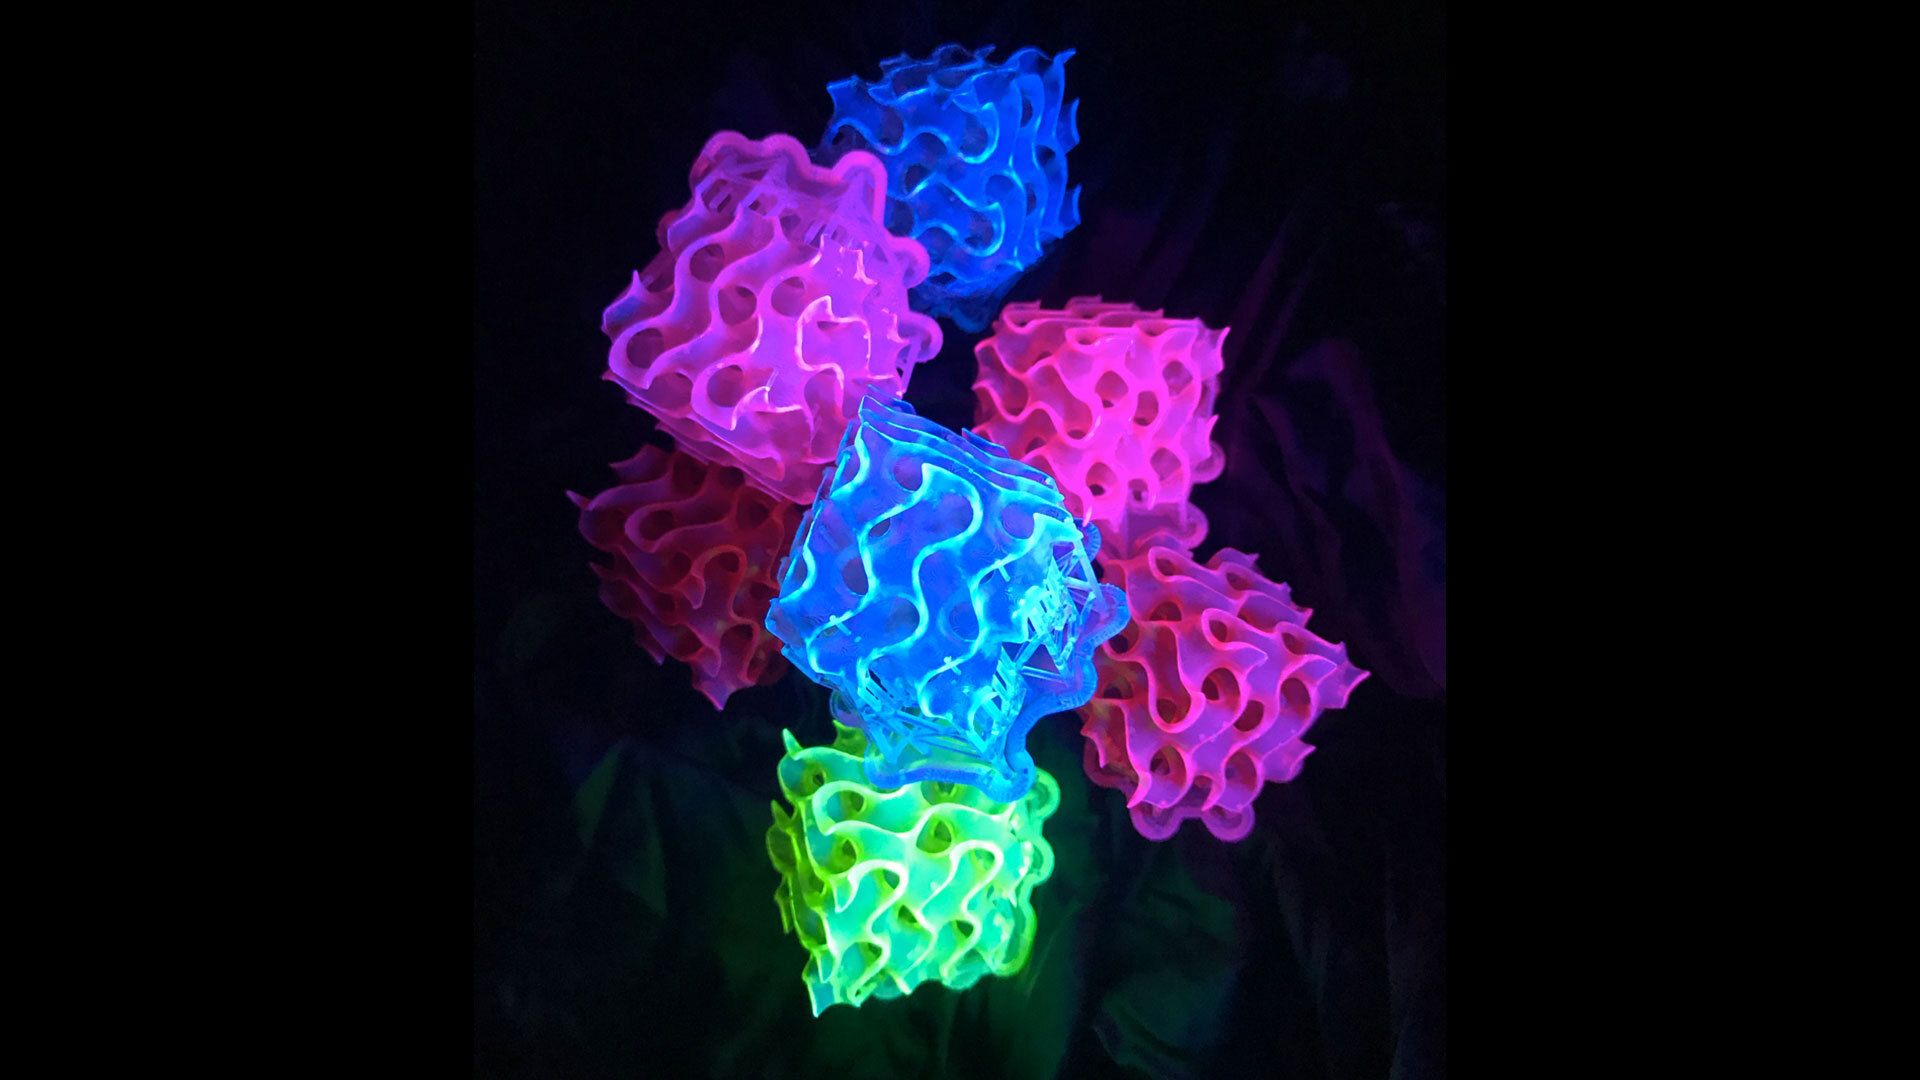 Glowing 3D-printed gyroid made with SMILES material